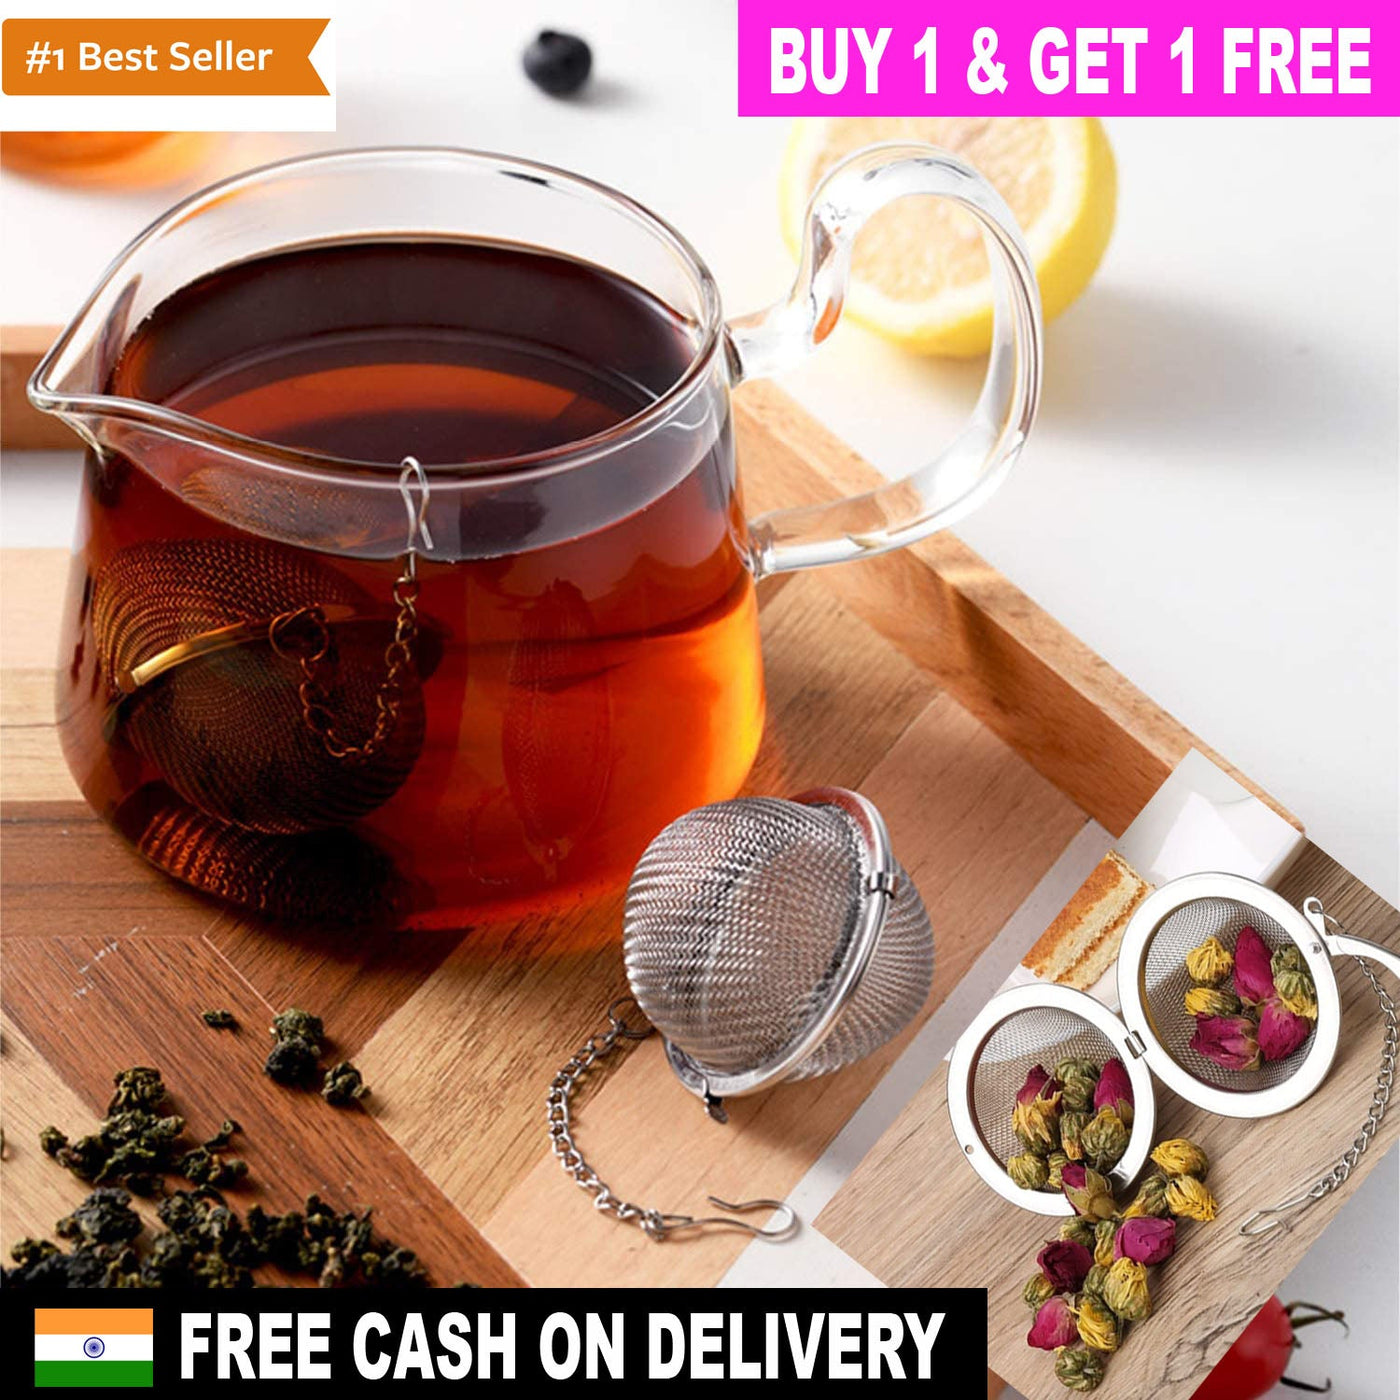 Stainless Steel Tea Diffuser - Premium Quality Great Happy IN BUY 1 GET 1 FREE (Total 2pcs - ₹599) 